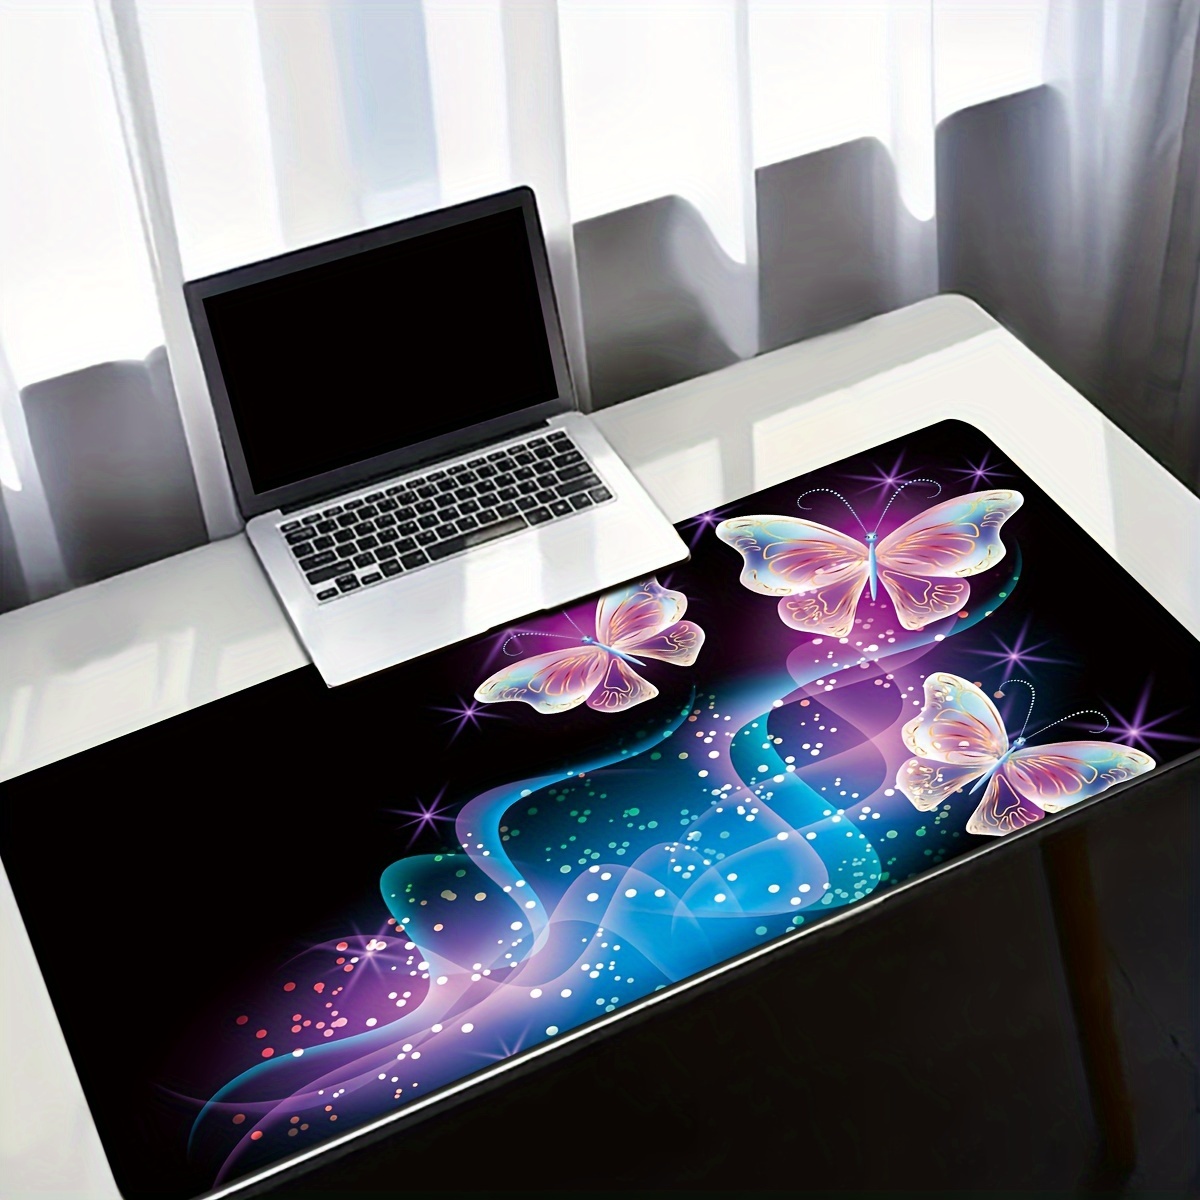 

1pc Large Gaming Mouse Pad, Butterfly Mouse Pad, Keyboard And Mouse Pad, Gaming Mouse Pad For Computer Laptop Office